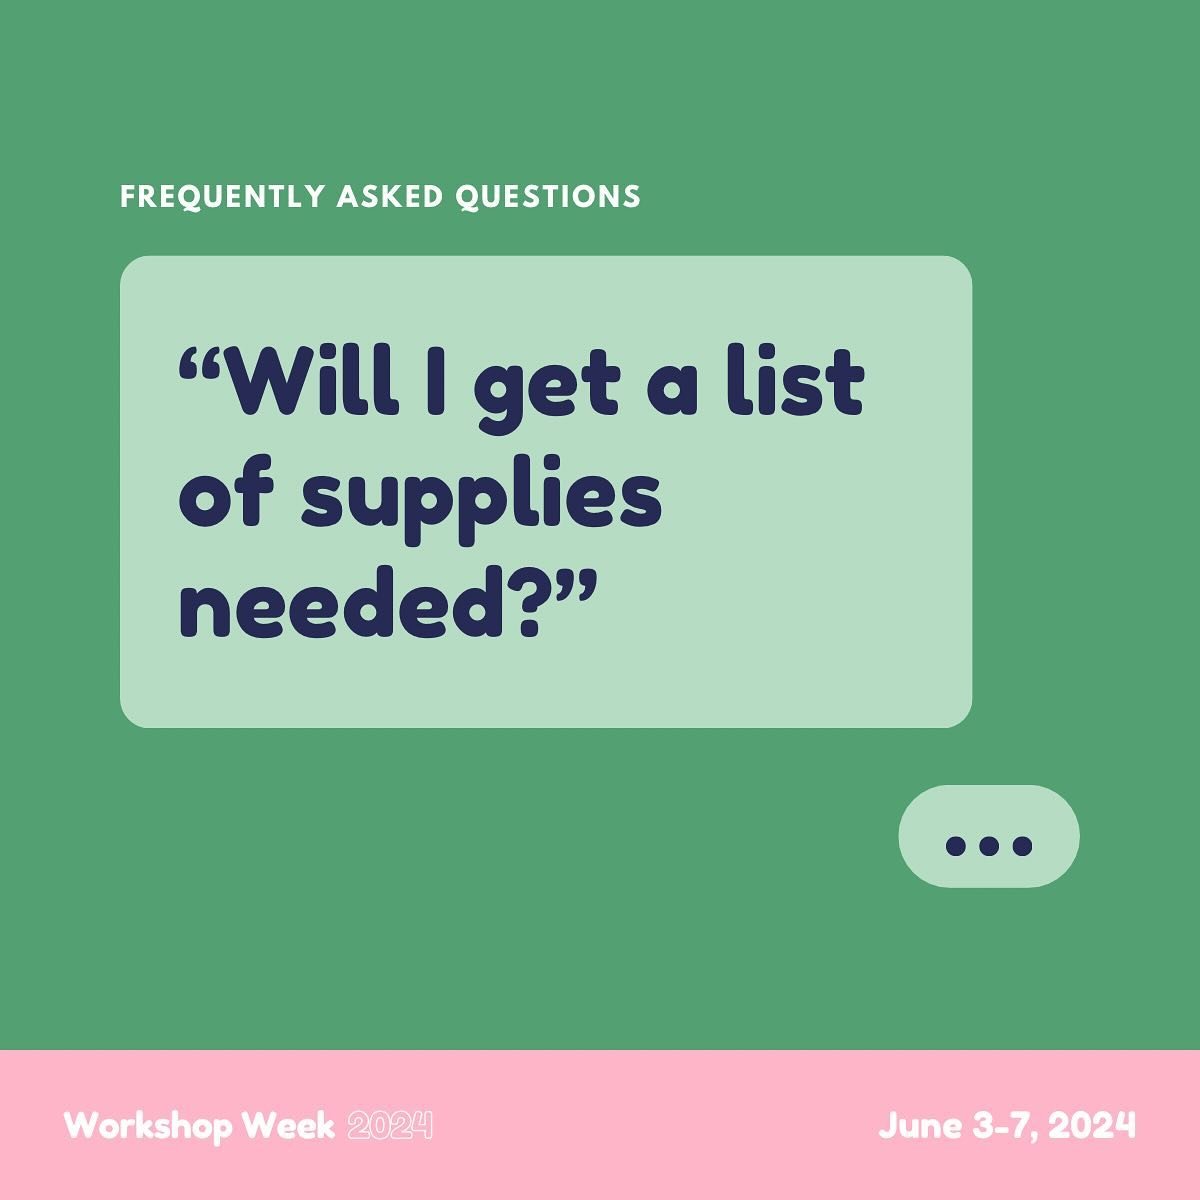 &ldquo;OMG, I&rsquo;M GONNA NEED TO GET NEW SUPPLIES! WHAT DO I NEED?! 😱&rdquo;

We&rsquo;ve got an entire supplies guide (48 pages long!) with lists of recommendations for eeeeeverv workshop, so you can make sure you have your tools in order before